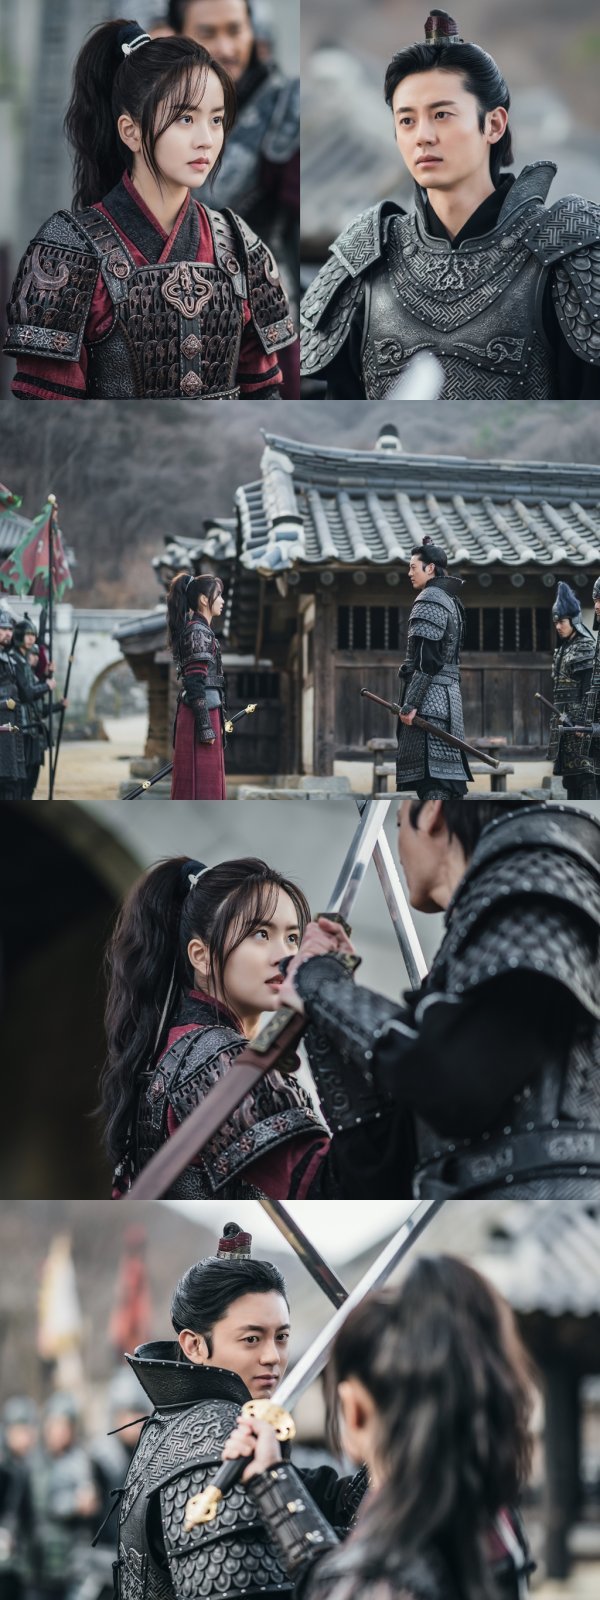 The tight knife fight between Kim So-hyun and Lee Ji-hoon, the moon-rising river, was captured.KBS 2TV Mon-Tue drama The Moon Rising River (playplayed by Han Ji-hoon/directed by Yoon Sang-ho/produced Victory Content) will be broadcast at 9:30 pm today (6th).The political battle over Goguryeo, which becomes more intense in the second half, and the struggle of Pyeong-gang (Kim So-hyun), which confronts it, are developing excitingly and adding to the immersion of viewers.In the 15th episode of The Moon Rising River, which aired on April 5, Go Won-pyo (Lee Hae-young) and Goh Kun (Lee Ji-hoon) turned the anbang theater over with a plot threatening the Pyeong-gang (Kim So-hyun) and the Goguryeo royal family.The plot of those who want to kill Goh Kun and Pyeongwon King (Kim Beop-rae), who bought Hwang Ju-sungs best friend (Choi Kwang-jae), and who caused soldiers, is becoming more intense and brutal as the day goes by.On April 6, the Moon Rising River side unveiled a still cut with a tense face-to-face face of Pyeong-gang and Goh Kun ahead of the 16th broadcast.In the open photo, Pyeong-gang and Goh Kun face each other with soldiers, with only cold, heavy air hovering between the two who do not back down.Then Pyeong-gang and Goh Kun are seen in full swing.Pyeong-gang and Goh Kun have been met with knives over and over again as teachers and disciples, watering and generals, but this is the first time they have ever held knives at each other so livably.In particular, Goh Kun has been a person who has been trying to keep Pyeong-gang for many years and Pyeong-gang in any situation.Since Goh Kuns mind turned around, it has become the biggest threat to Pyeong-gang.The tight confrontation between the two people who have been seriously confronted with the sword adds curiosity about the result and makes the hand sweat.To point a knife at Princess Pyeong-gang is an obvious reverse, which is different from the one that caused soldiers by buying others.Why does Goh Kun confront Pyeong-gang until he commits a direct reverse crime?Pyeong-gang can stop the attack of his swordsman, Goh Kun, and suppress the reverse, all of which are expected to be released on the Moon Rising River.Meanwhile, the 16th KBS 2TV Mon-Tue drama The River to the Moon will be broadcast at 9:30 pm today (6th) night, which will confirm the full story of Kim So-hyun and Lee Ji-hoons tense sword fight.